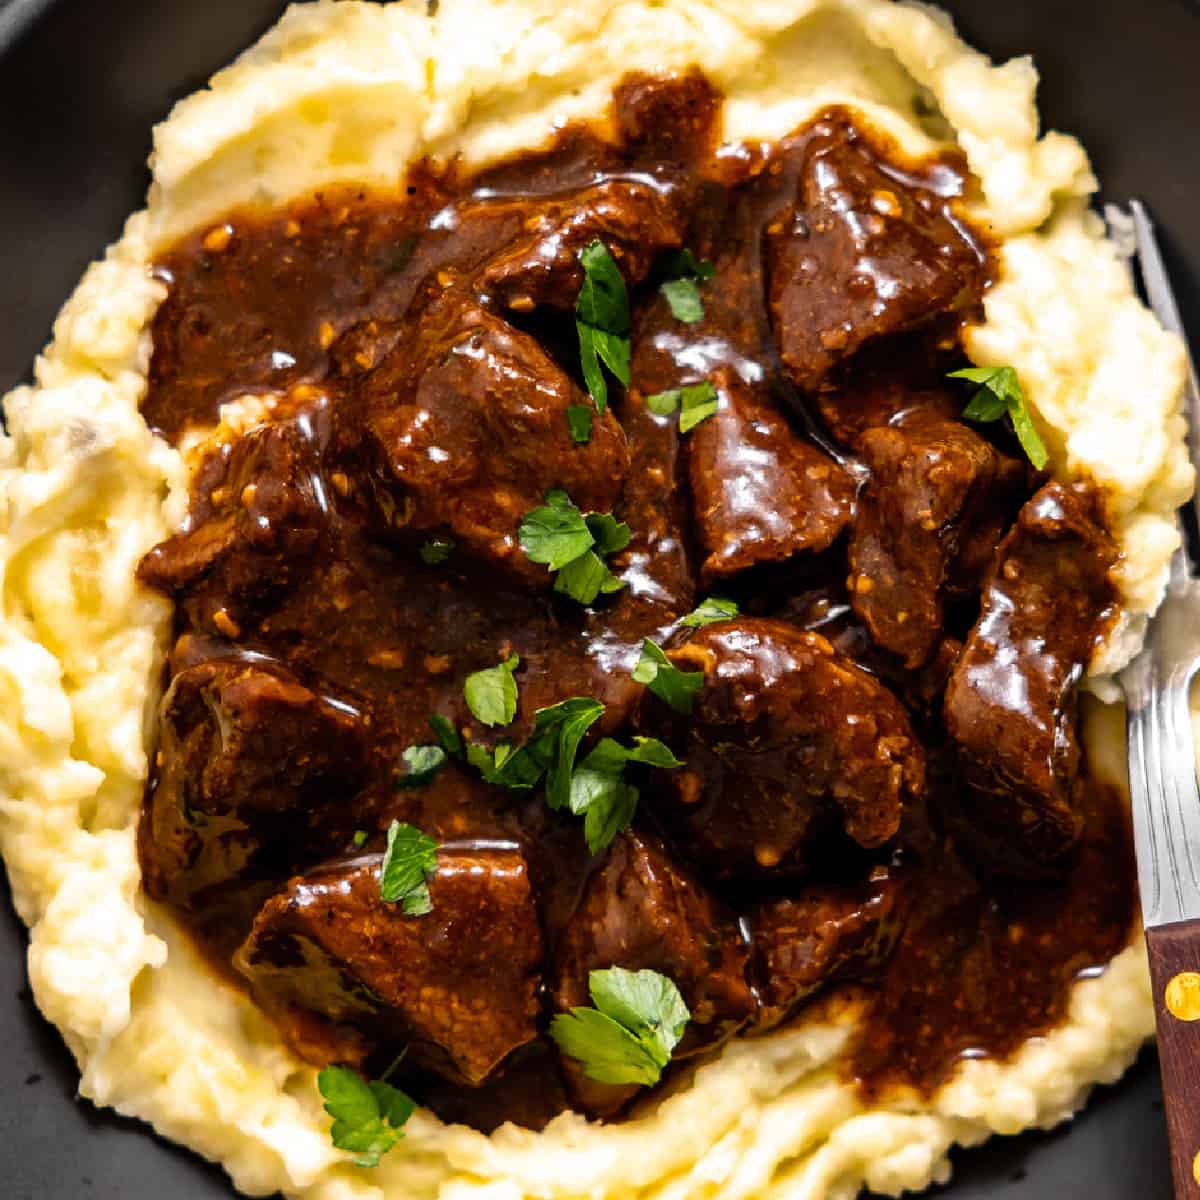 Beef tips and gravy served over mashed potatoes.